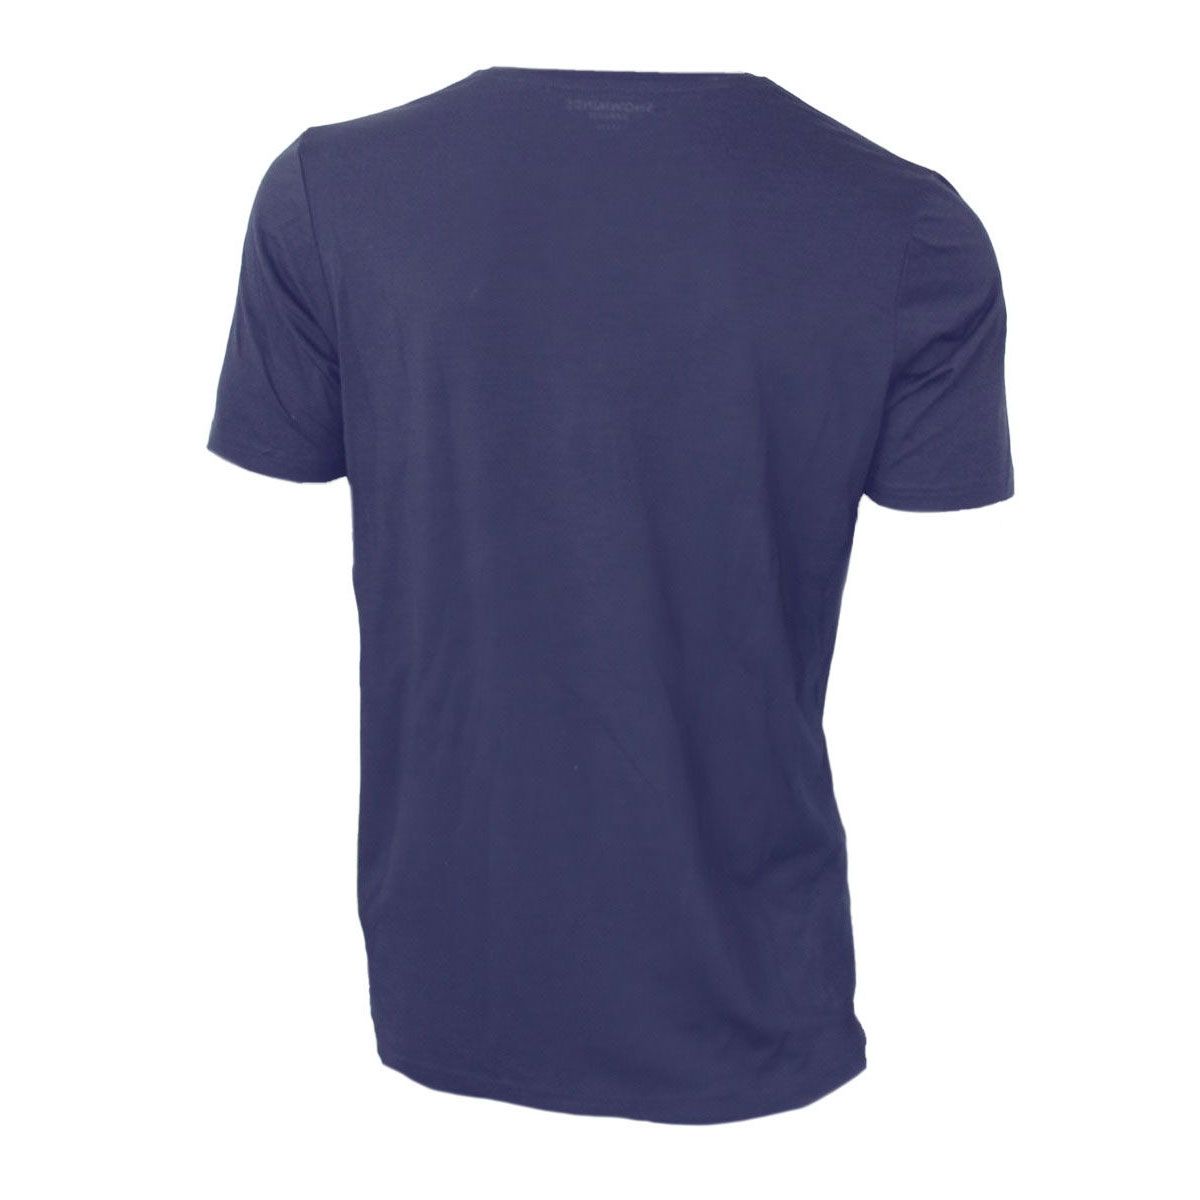 The Ultimate Adventure Merino Tee, Snowminds, unisex, blue bell weather